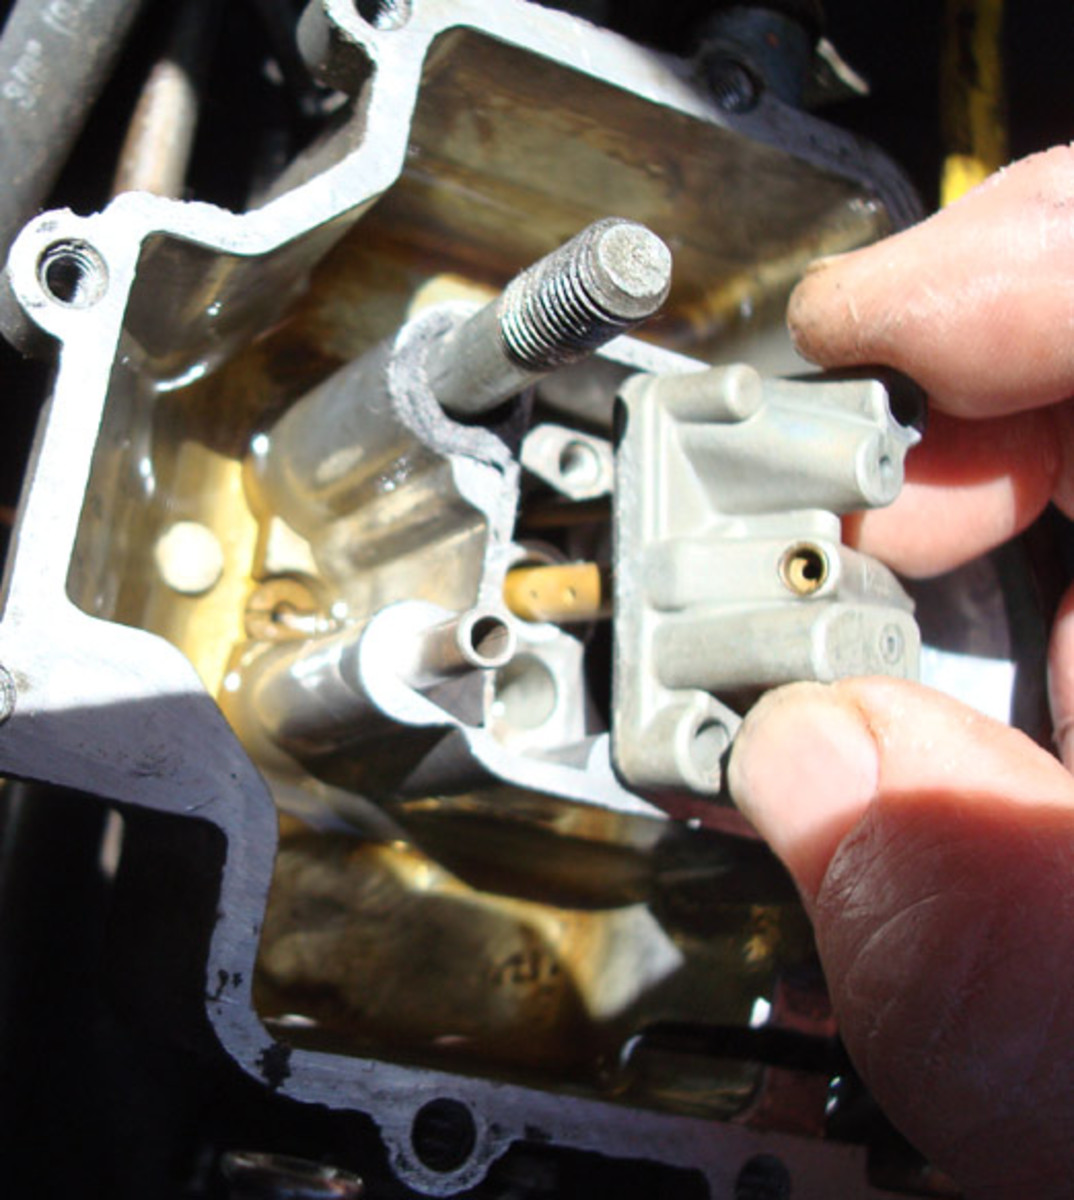 Remove the two screws that hold the Venturi cluster on the carb